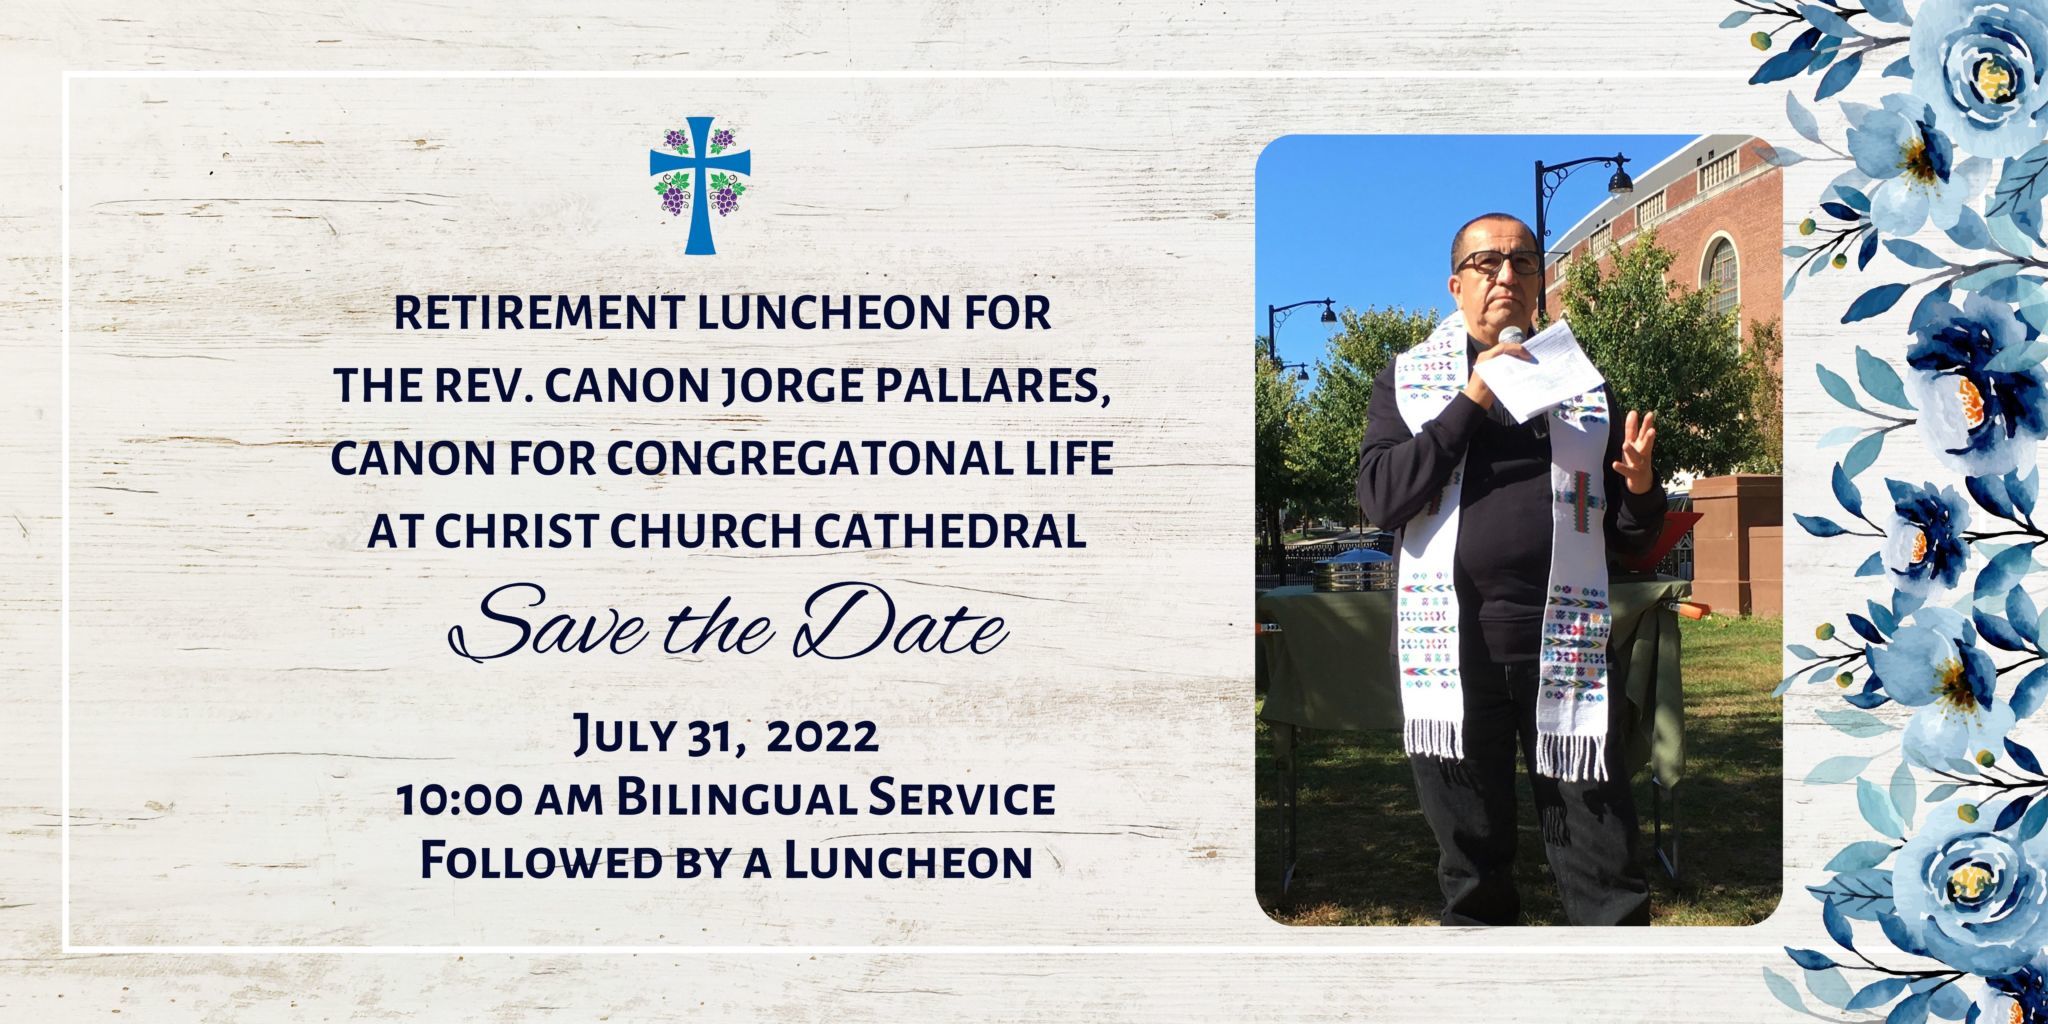 Bilingual Mass and Retirement Luncheon for Canon Pallares